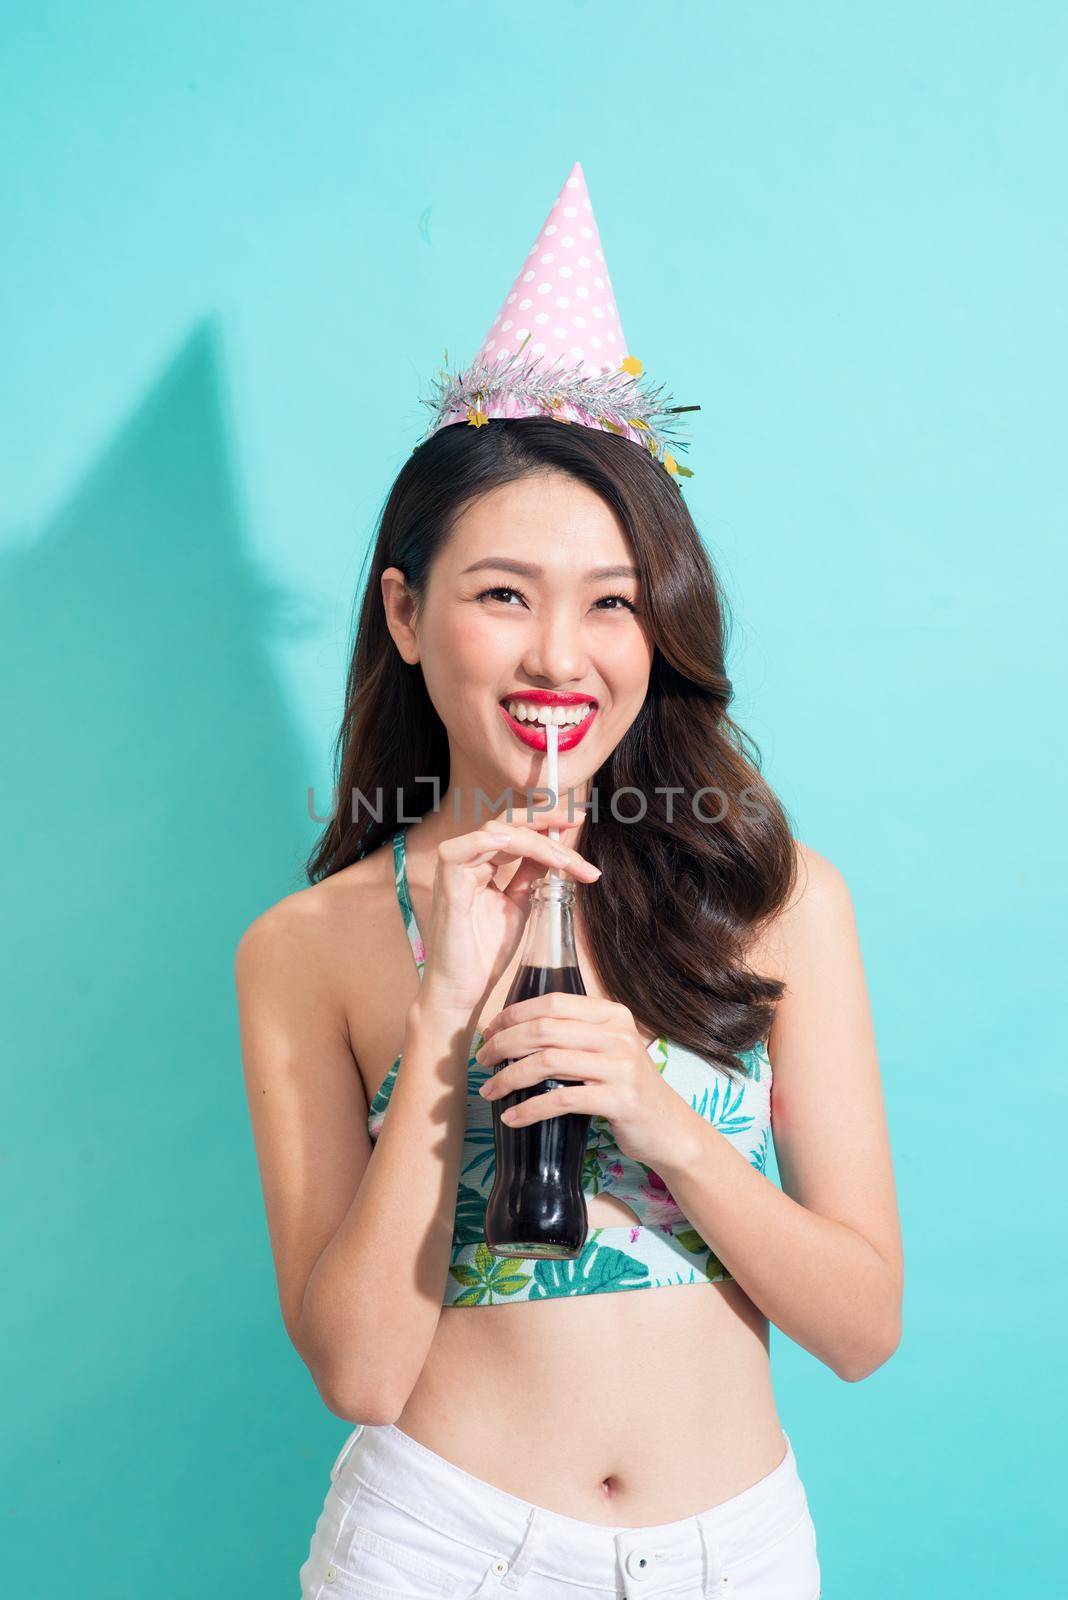 Fashion pretty woman drinks coke from bottle over colorful blue background